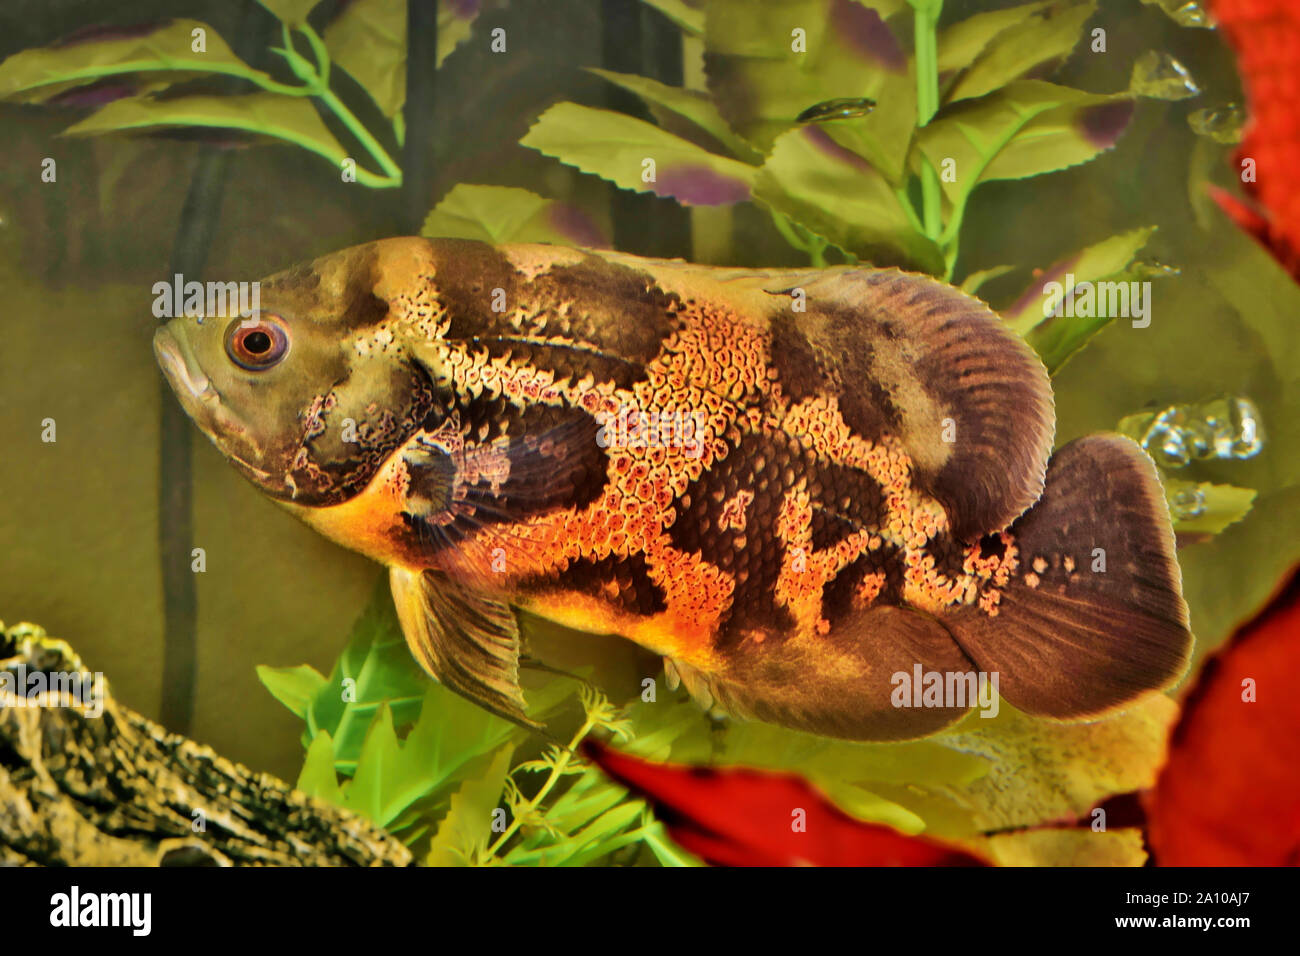 Tiger Oscar fish (Astronotus ocellatus) swimming in an aquarium. These creatures are natural predators native to the Amazon River and are kept as pets. Stock Photo